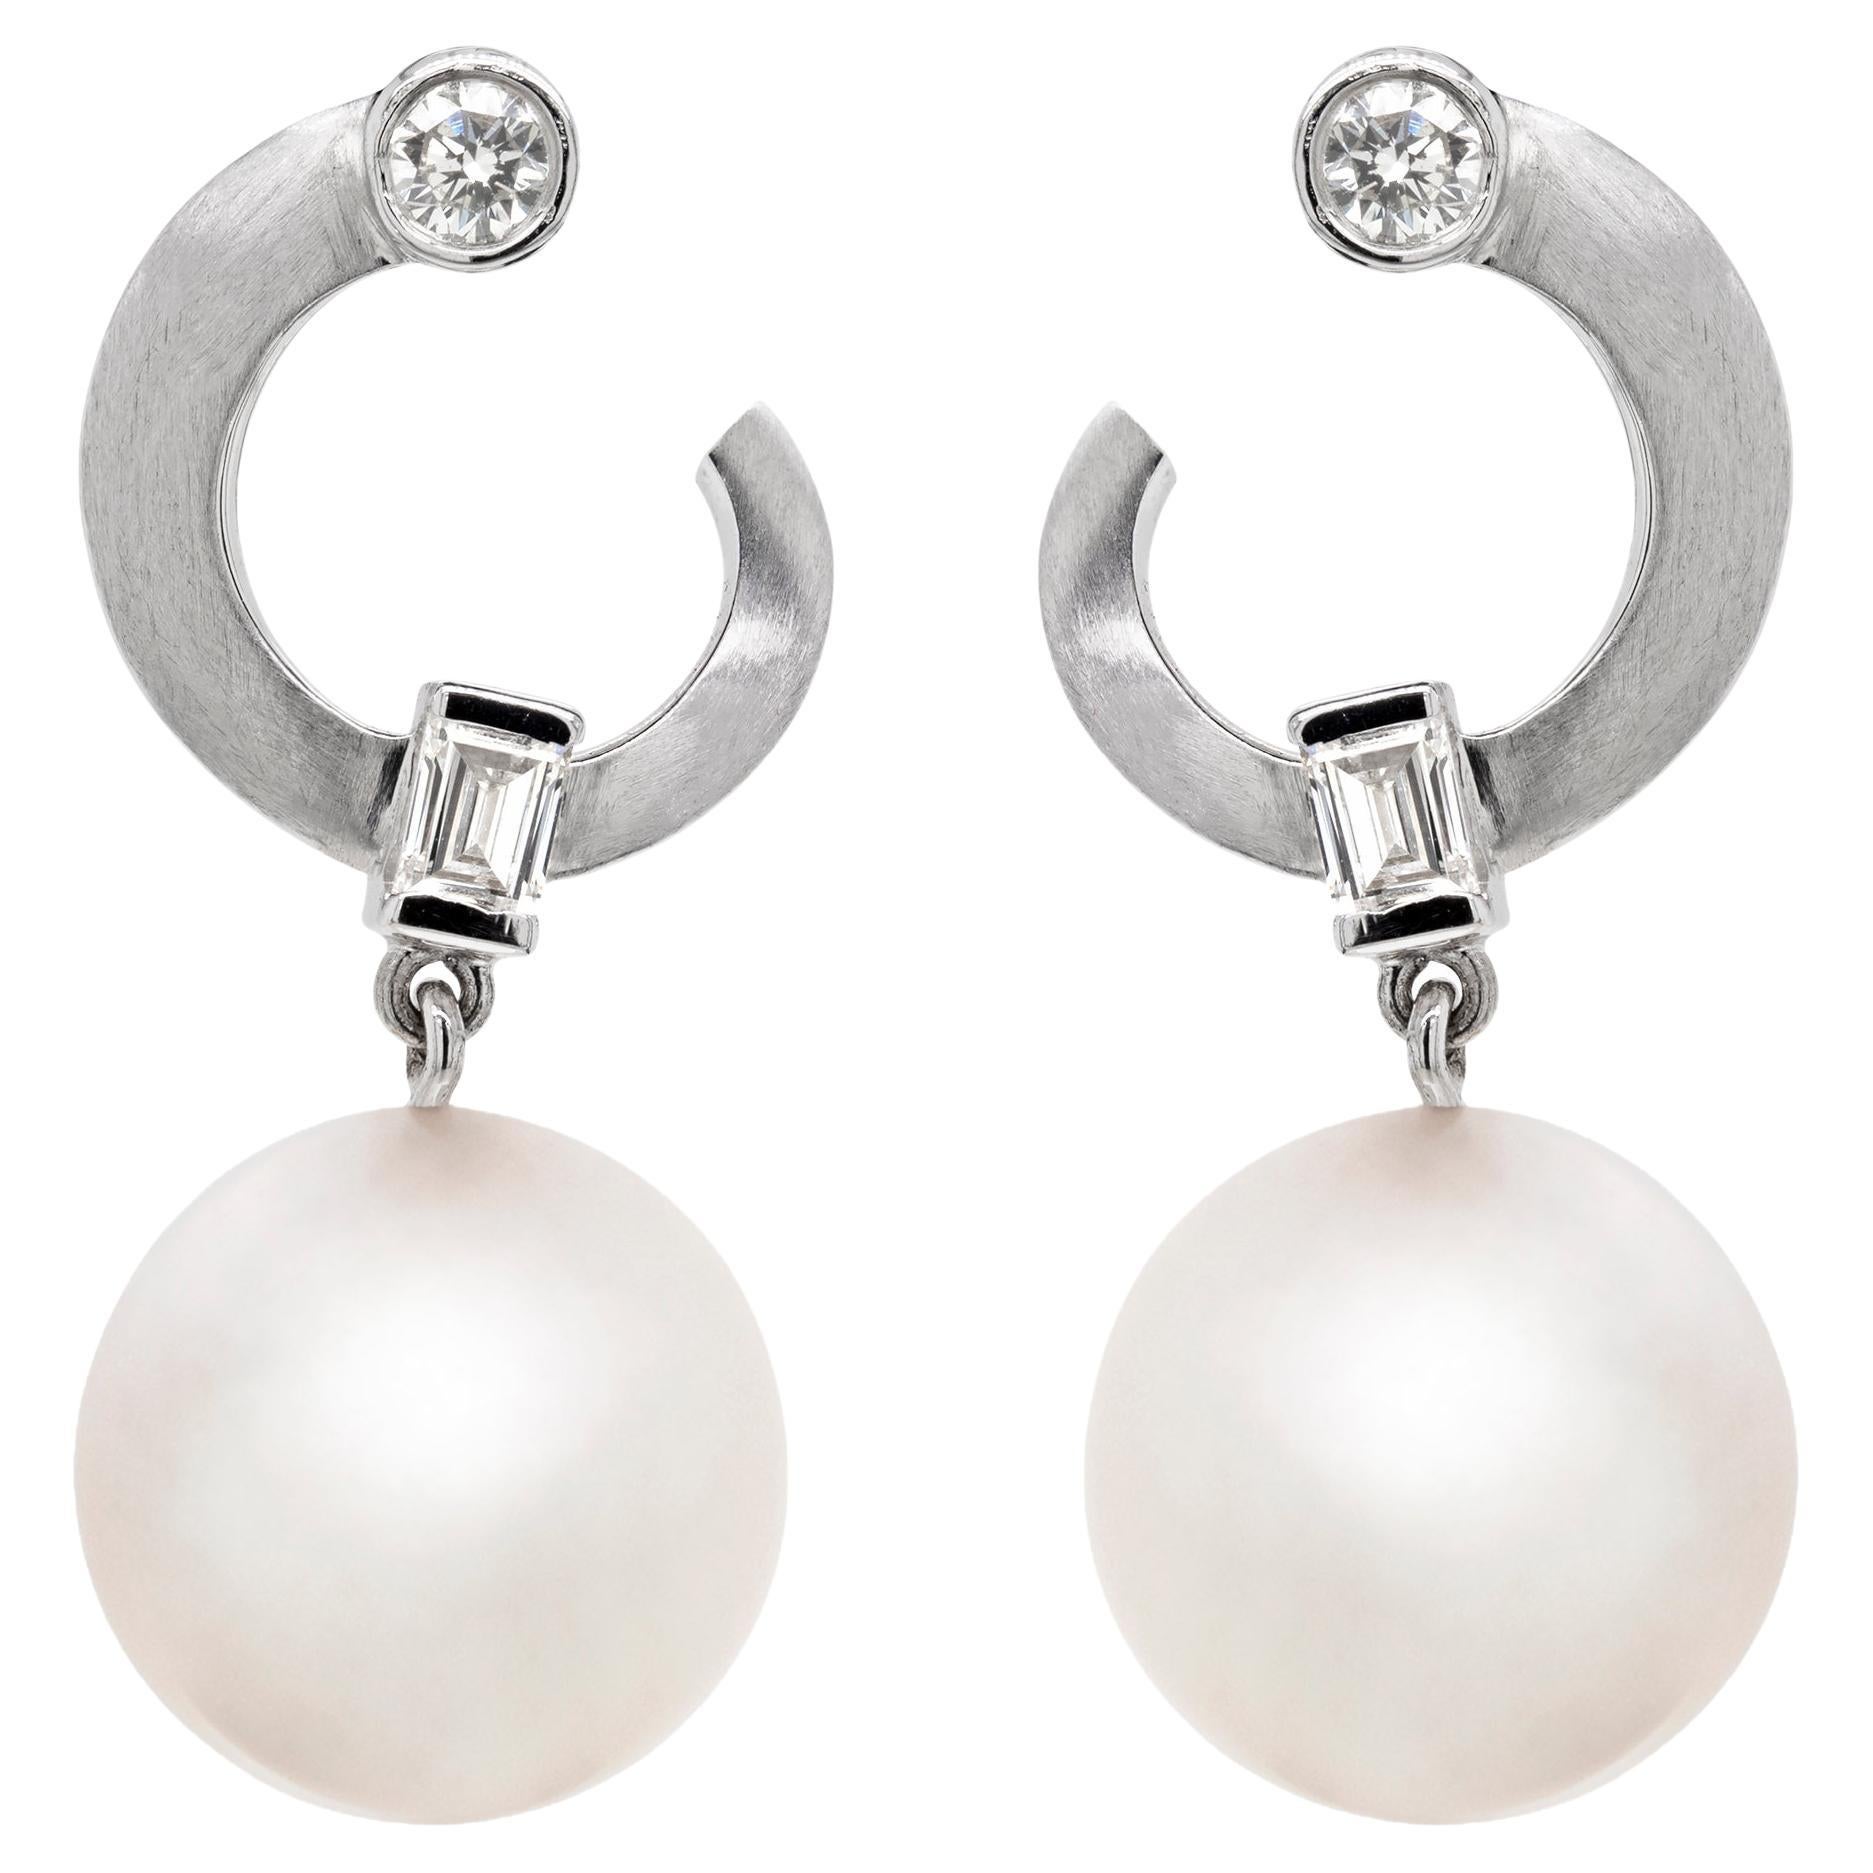 South Sea Pearl and Diamond 18 Carat White Gold Drop Earrings